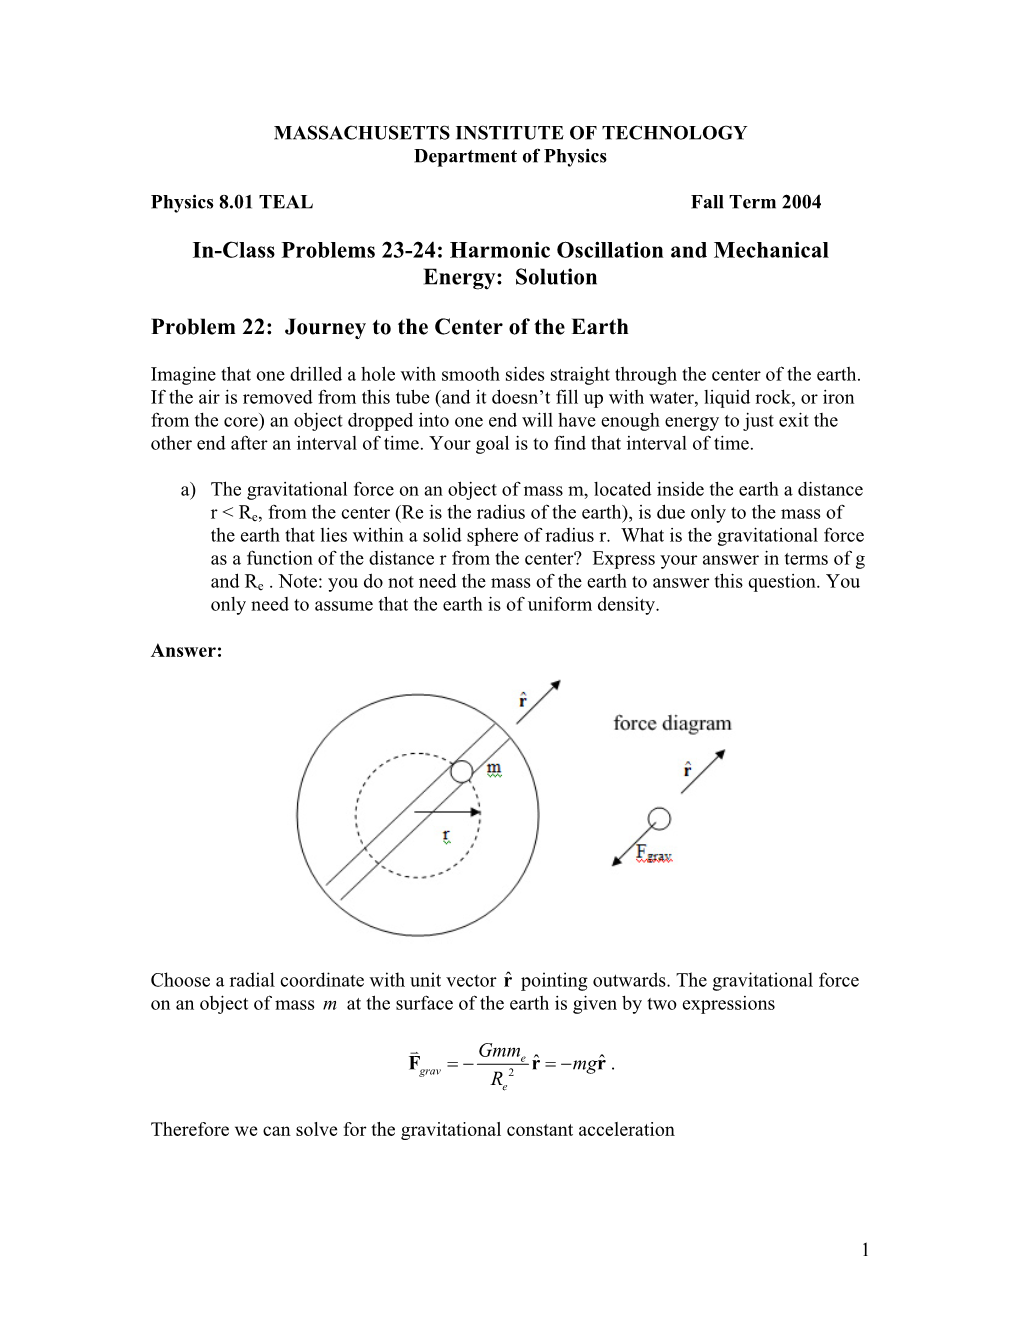 In-Class Problems 23-24: Harmonic Oscillation and Mechanical Energy: Solution